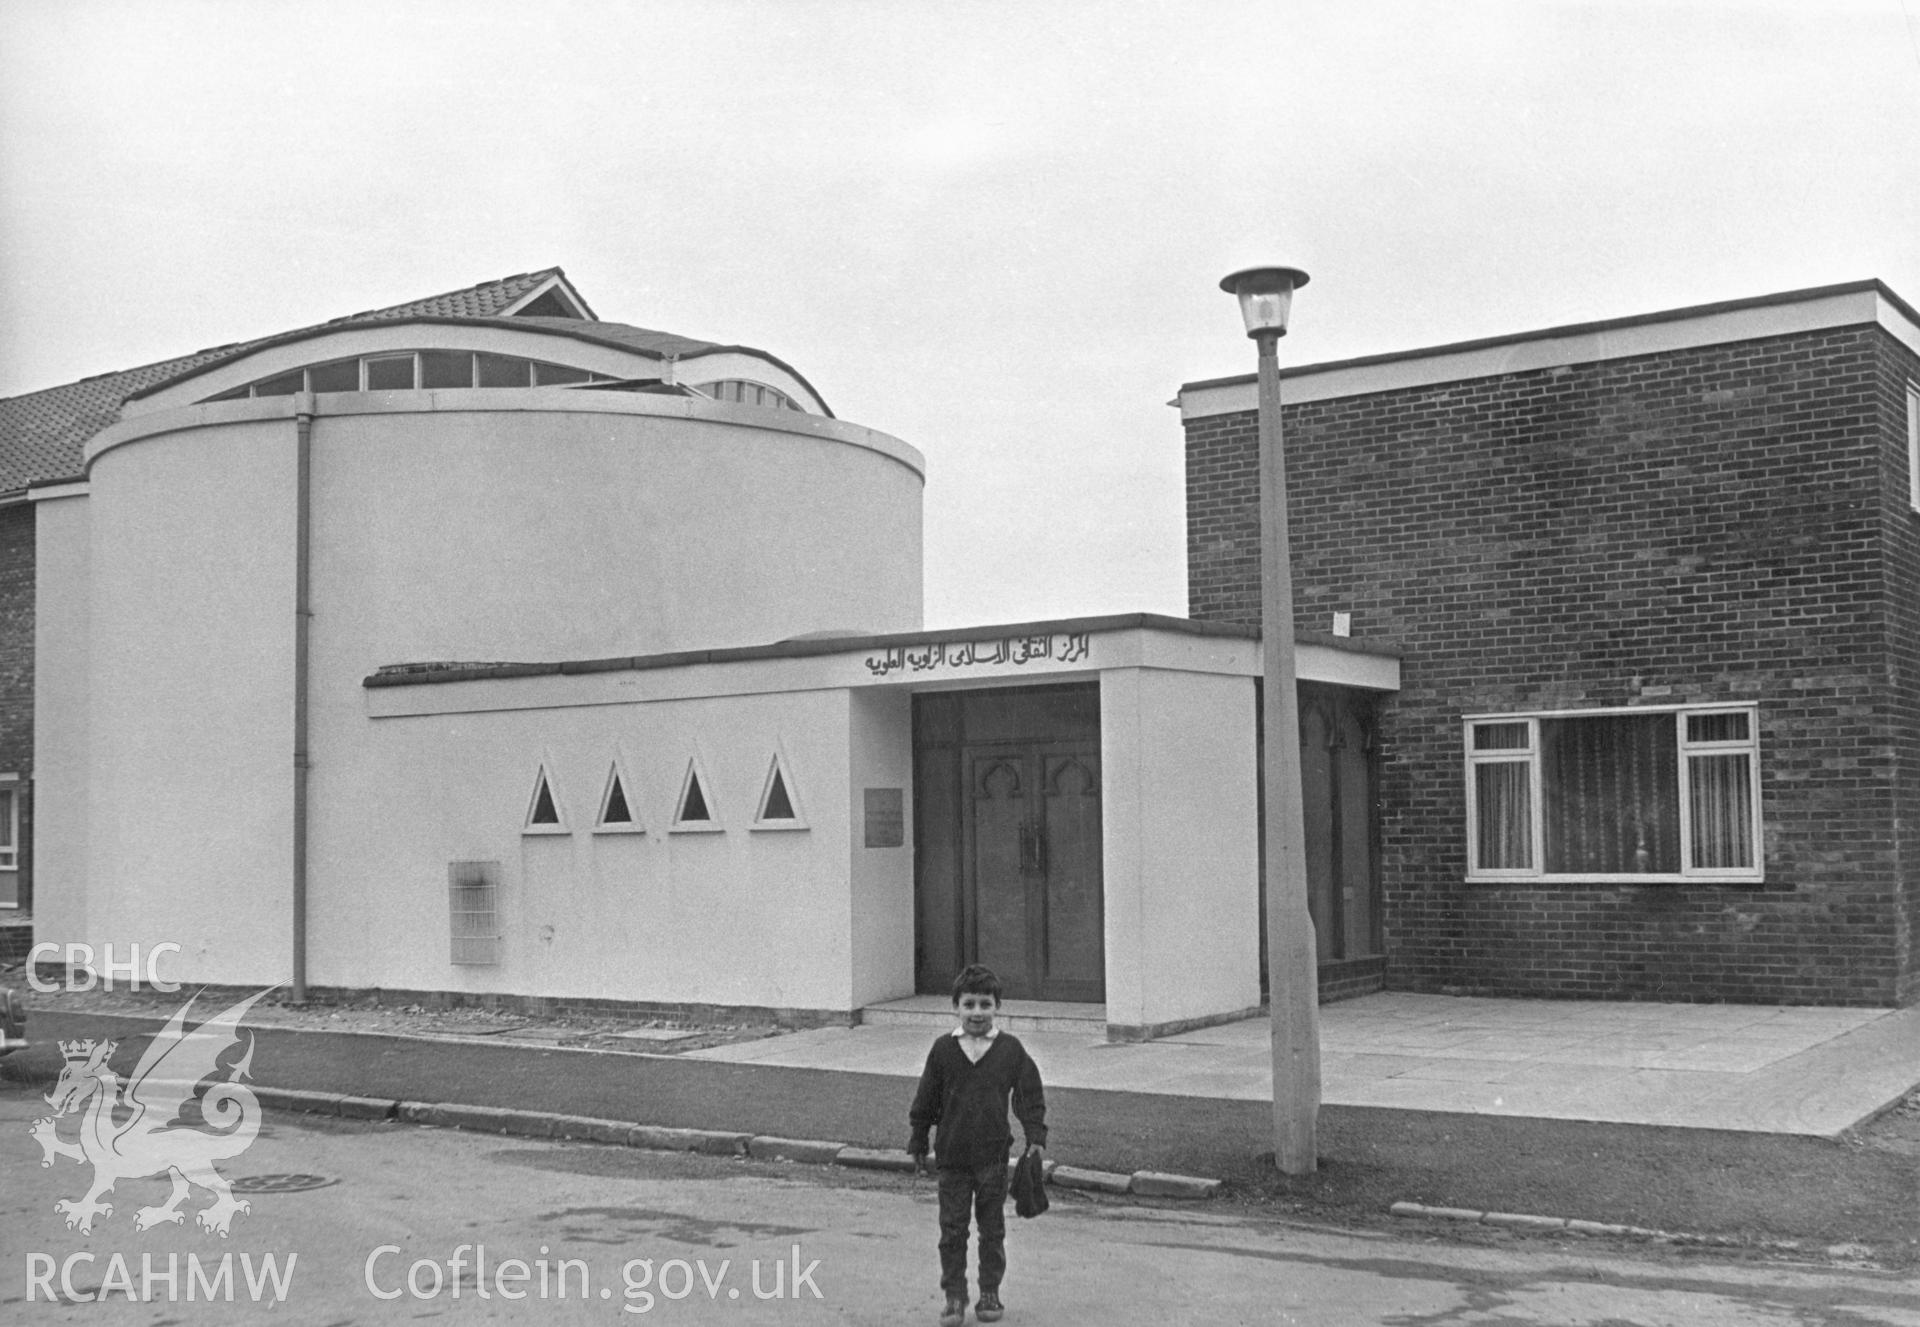 1 b/w print showing exterior view of Islamic Centre and Mosque, Alice Street, Cardiff, collated by the former Central Office of Information.